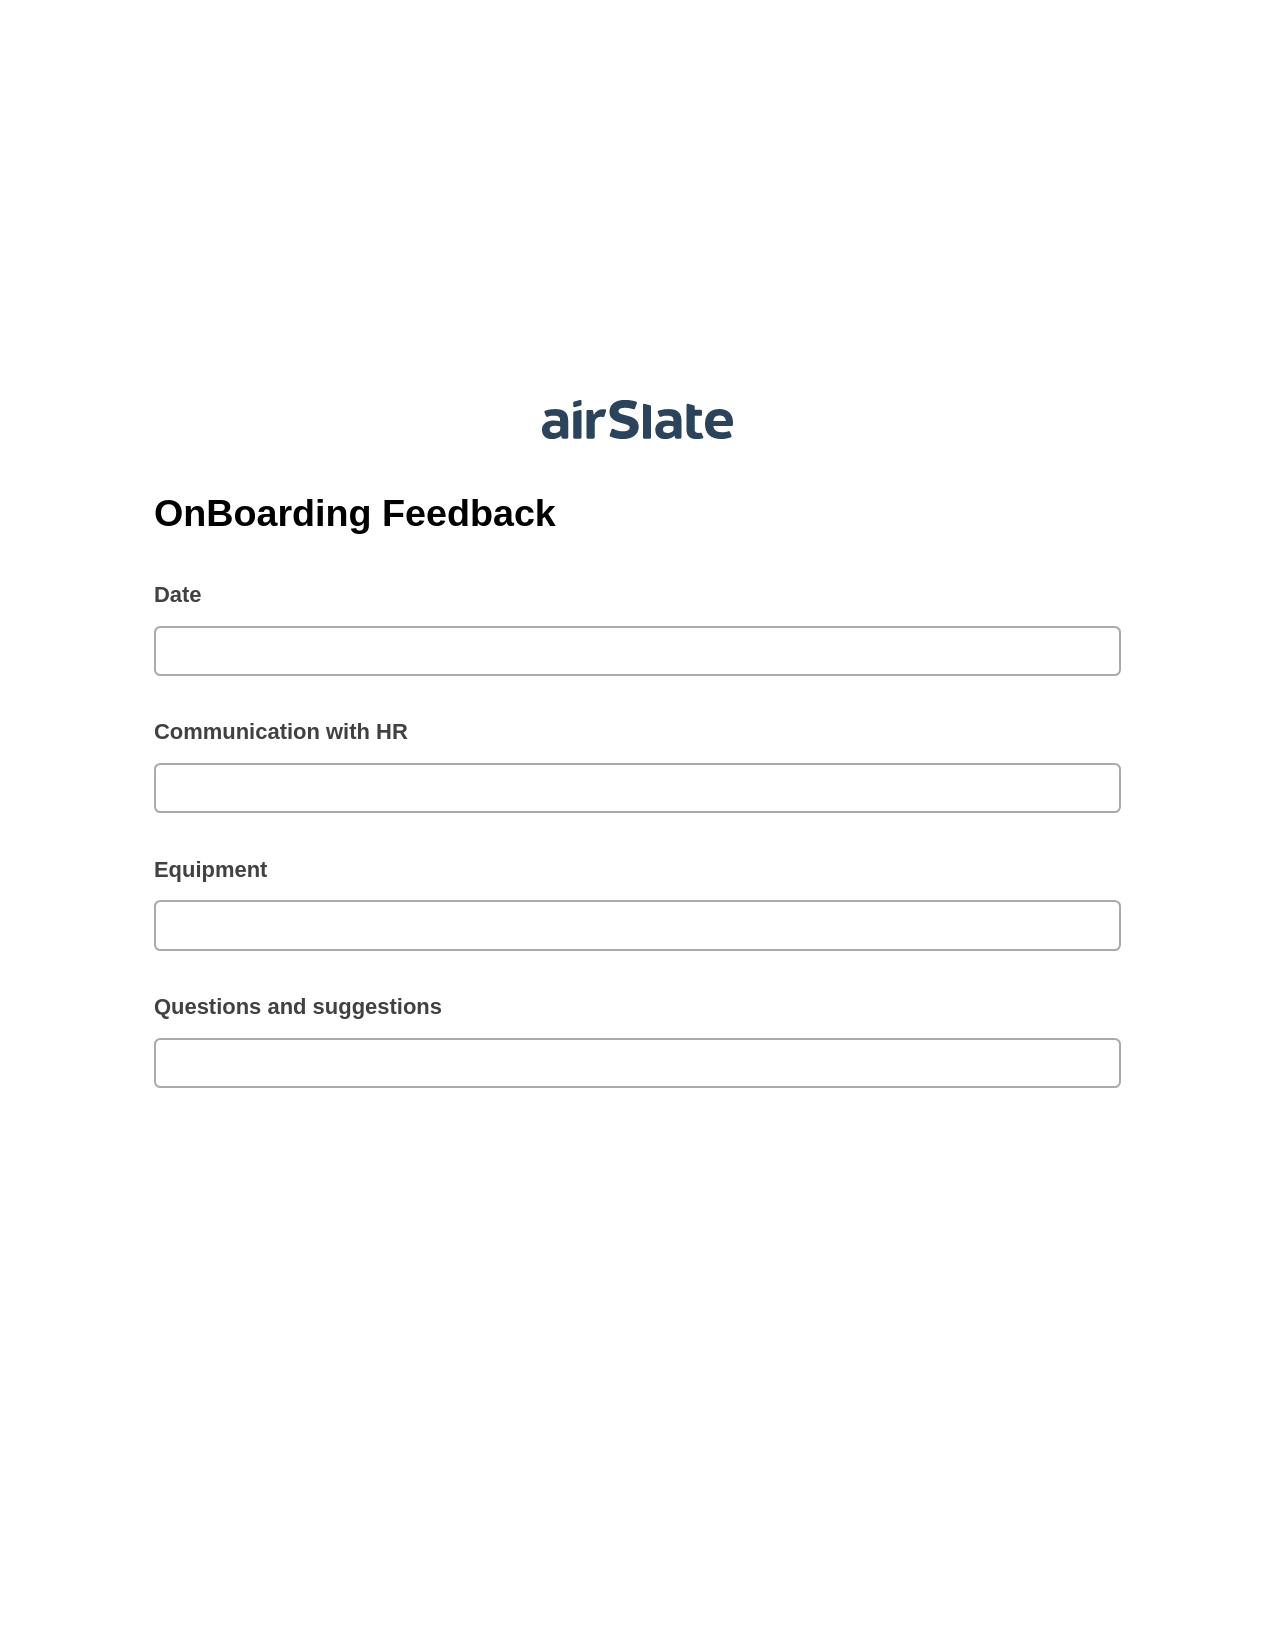 OnBoarding Feedback Pre-fill from CSV File Bot, Reminder Bot, Export to Excel 365 Bot